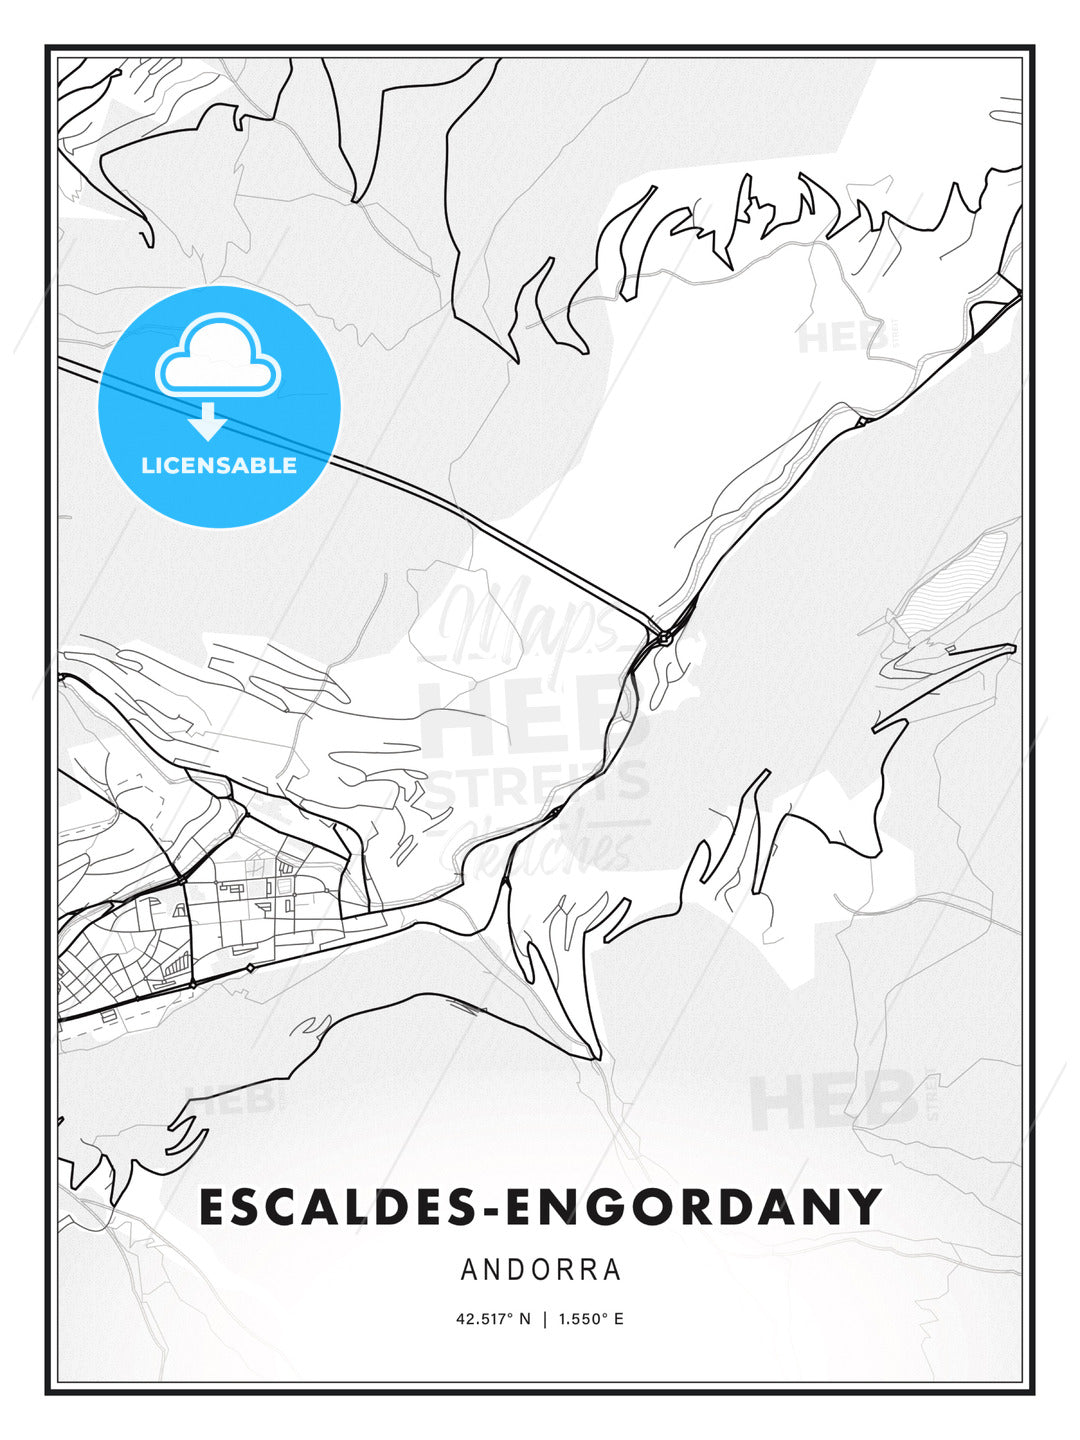 Escaldes-Engordany, Andorra, Modern Print Template in Various Formats - HEBSTREITS Sketches